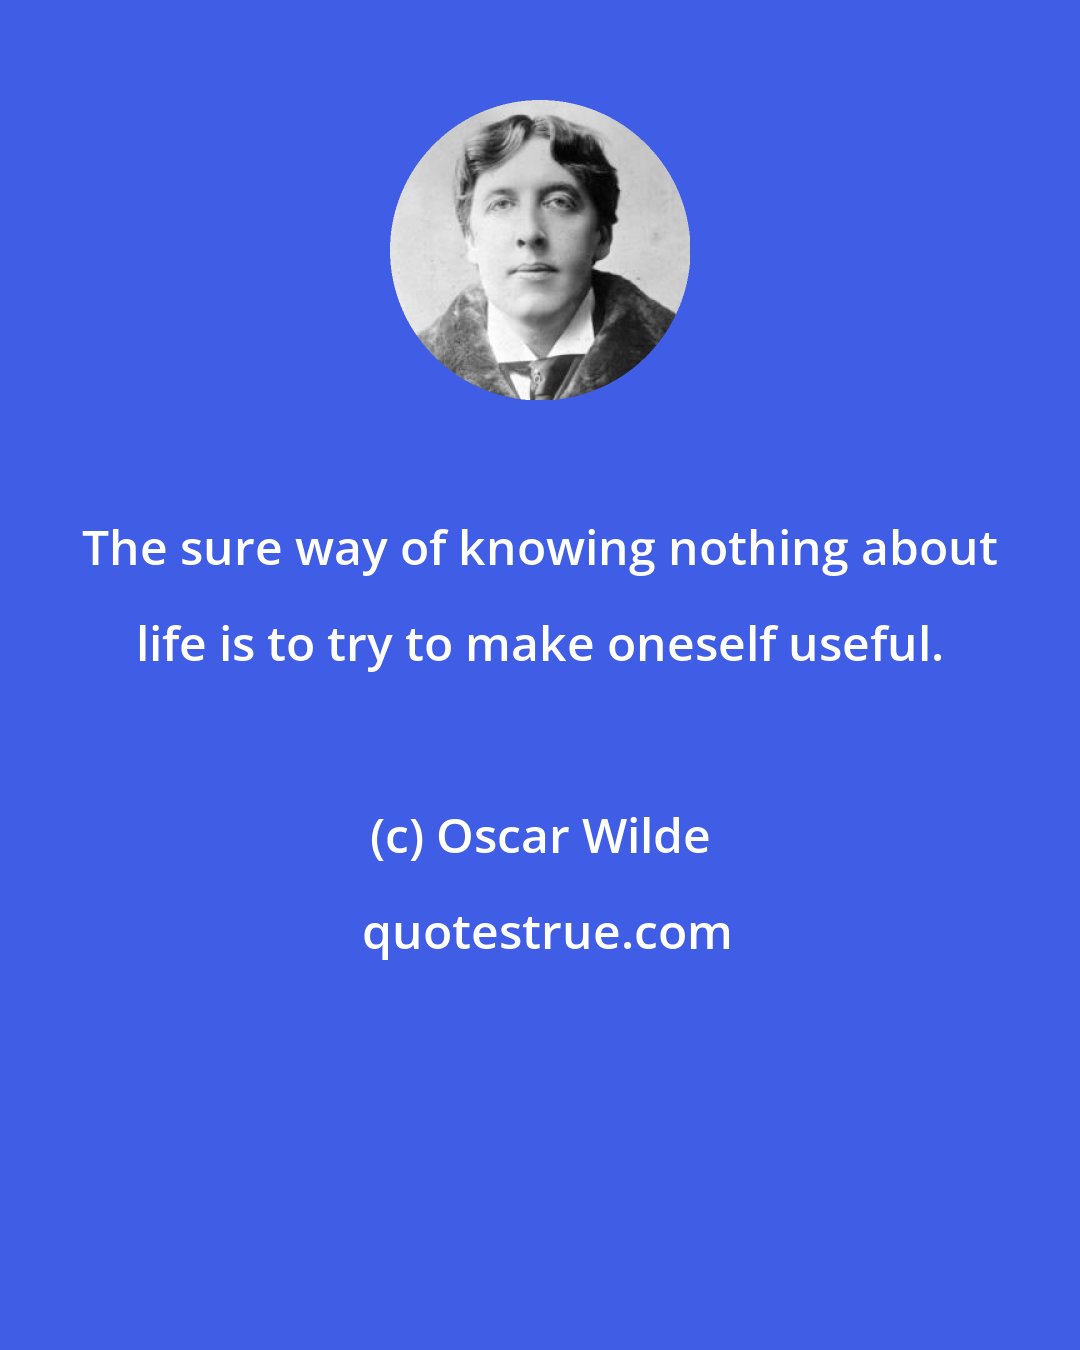 Oscar Wilde: The sure way of knowing nothing about life is to try to make oneself useful.